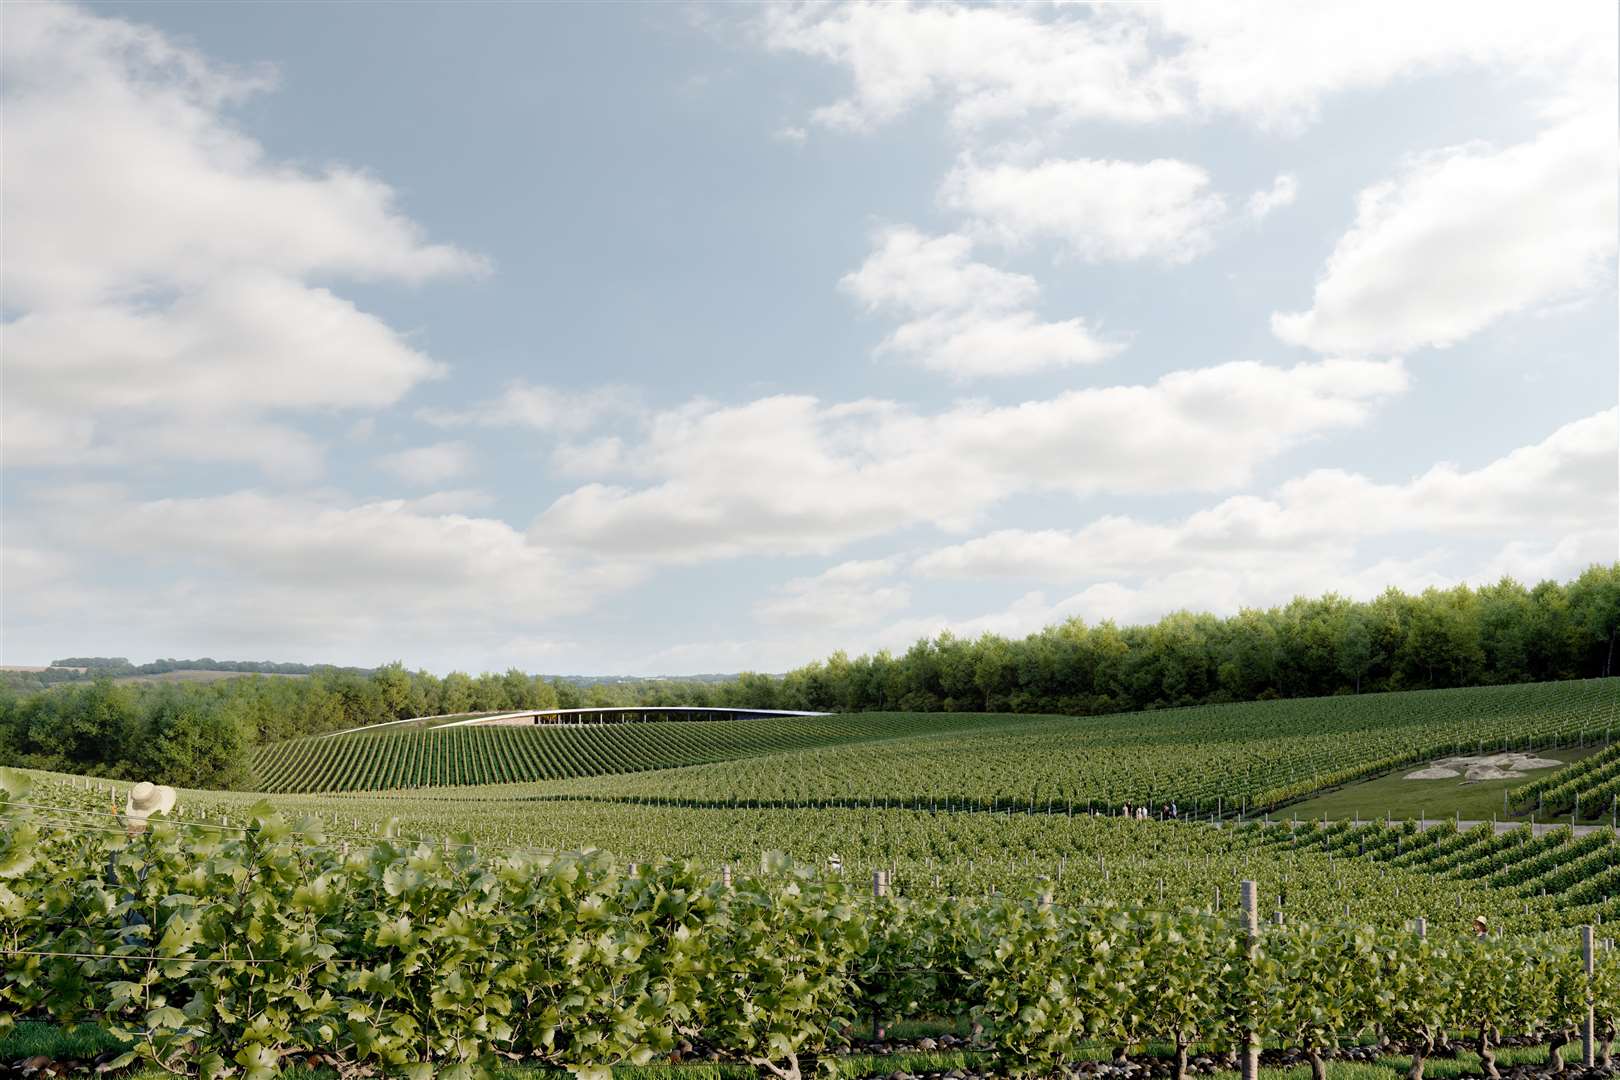 An artist's impression of the winery and vineyards